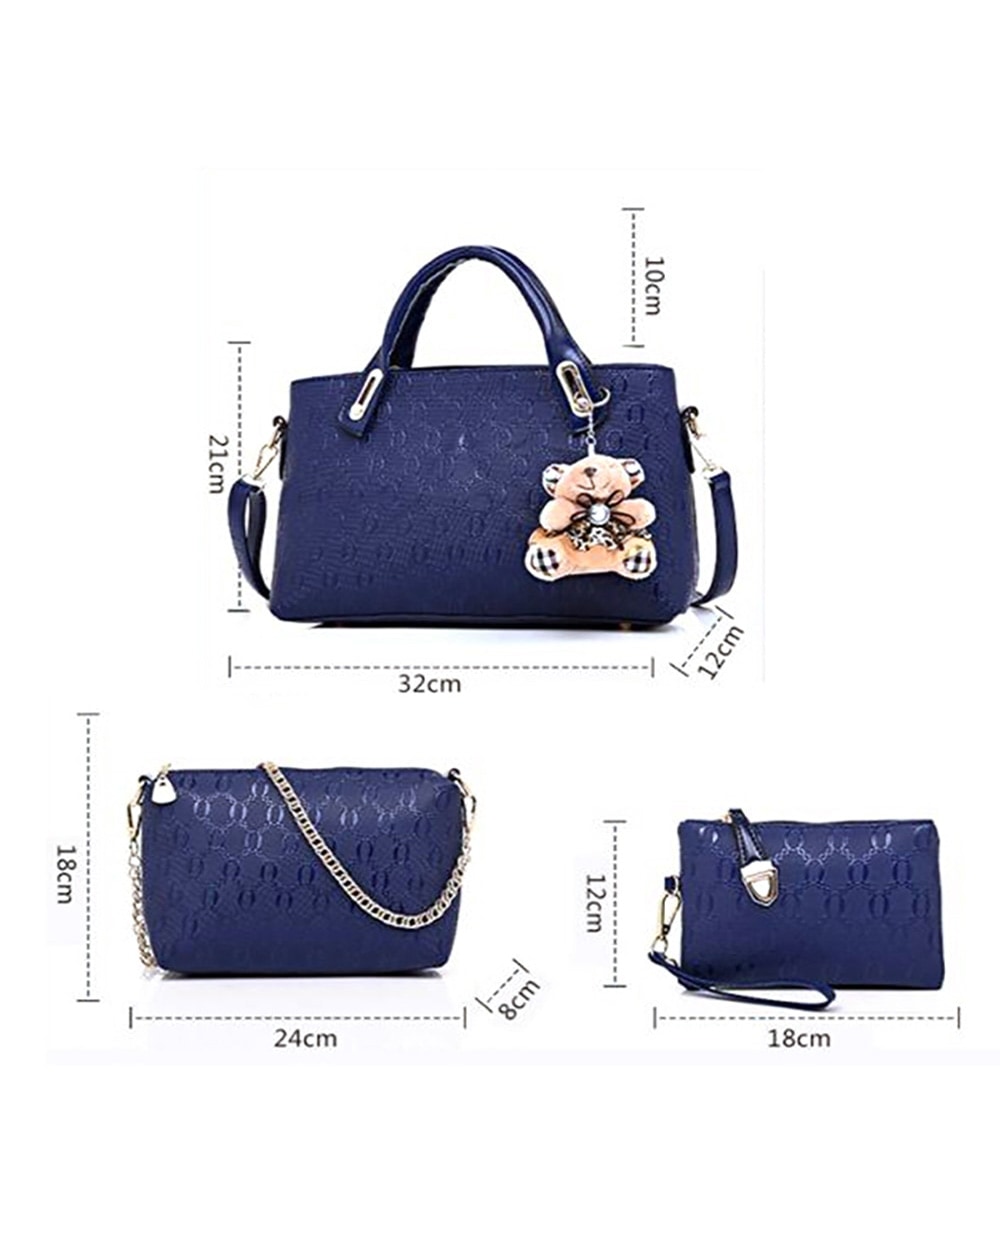 4 piece bags size guide